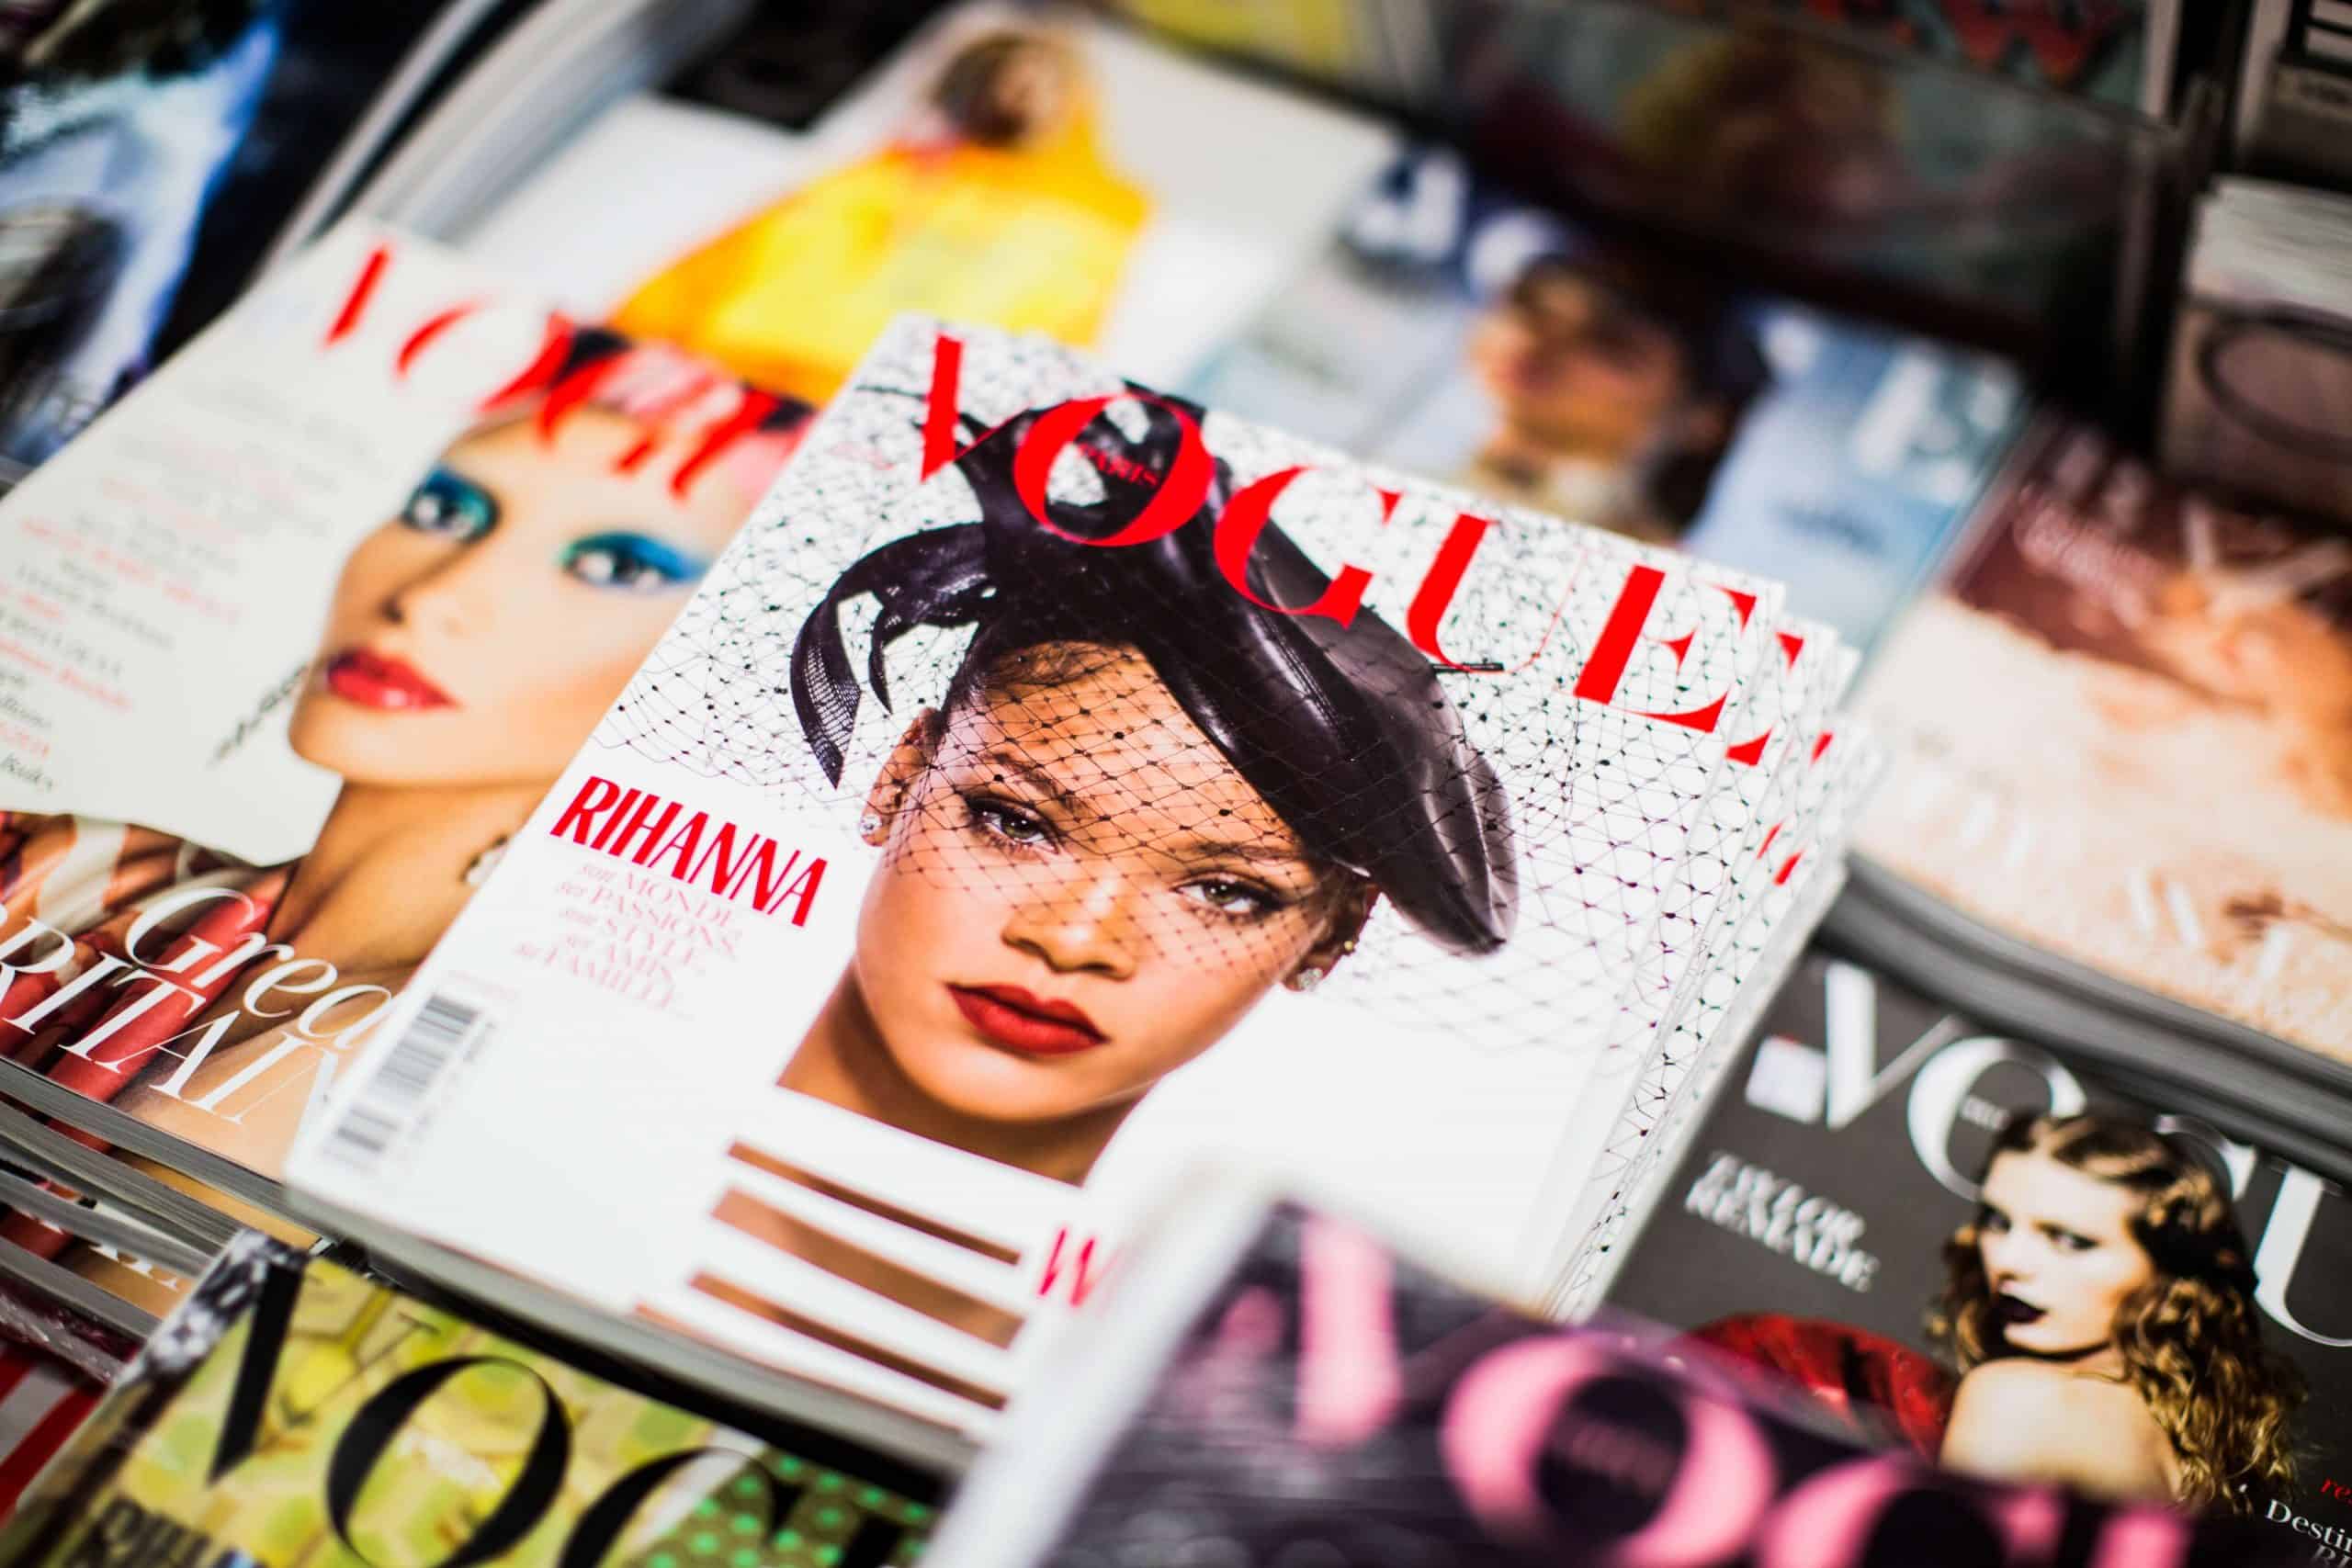 The most famous Vogue magazine covers